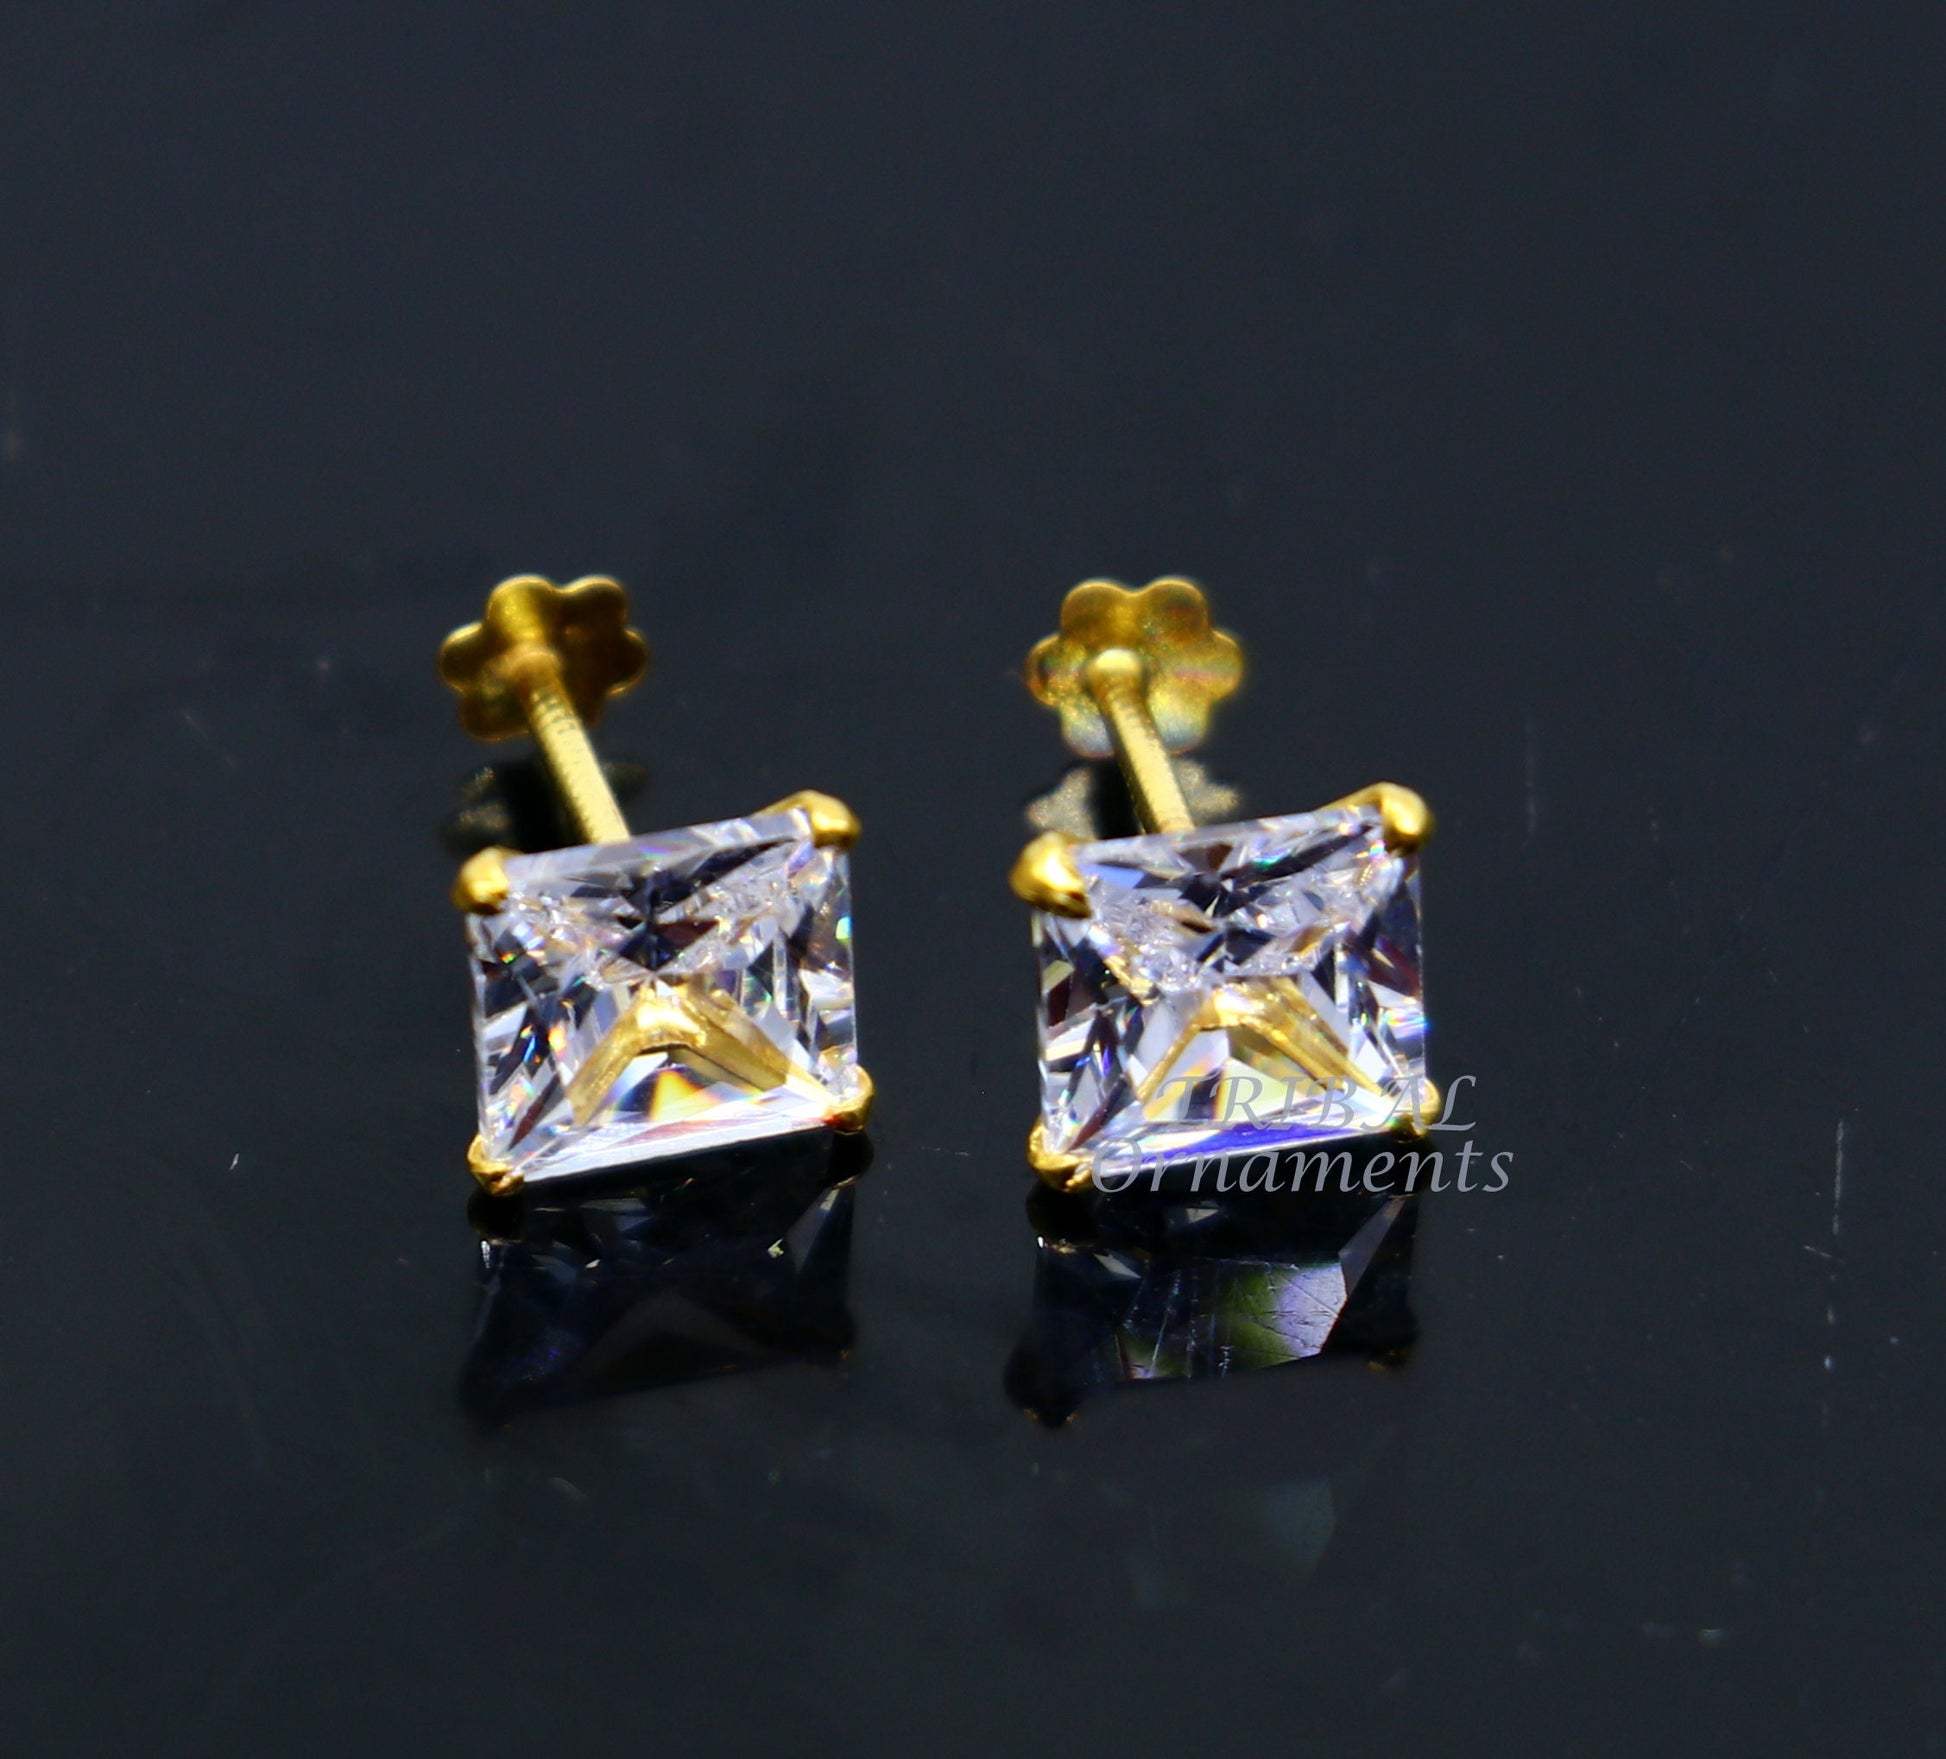 6mm OR 5 mm 18kt yellow gold handmade single cubic zircon stone square shape stud earring cartilage customized unisex jewelry er143 - TRIBAL ORNAMENTS